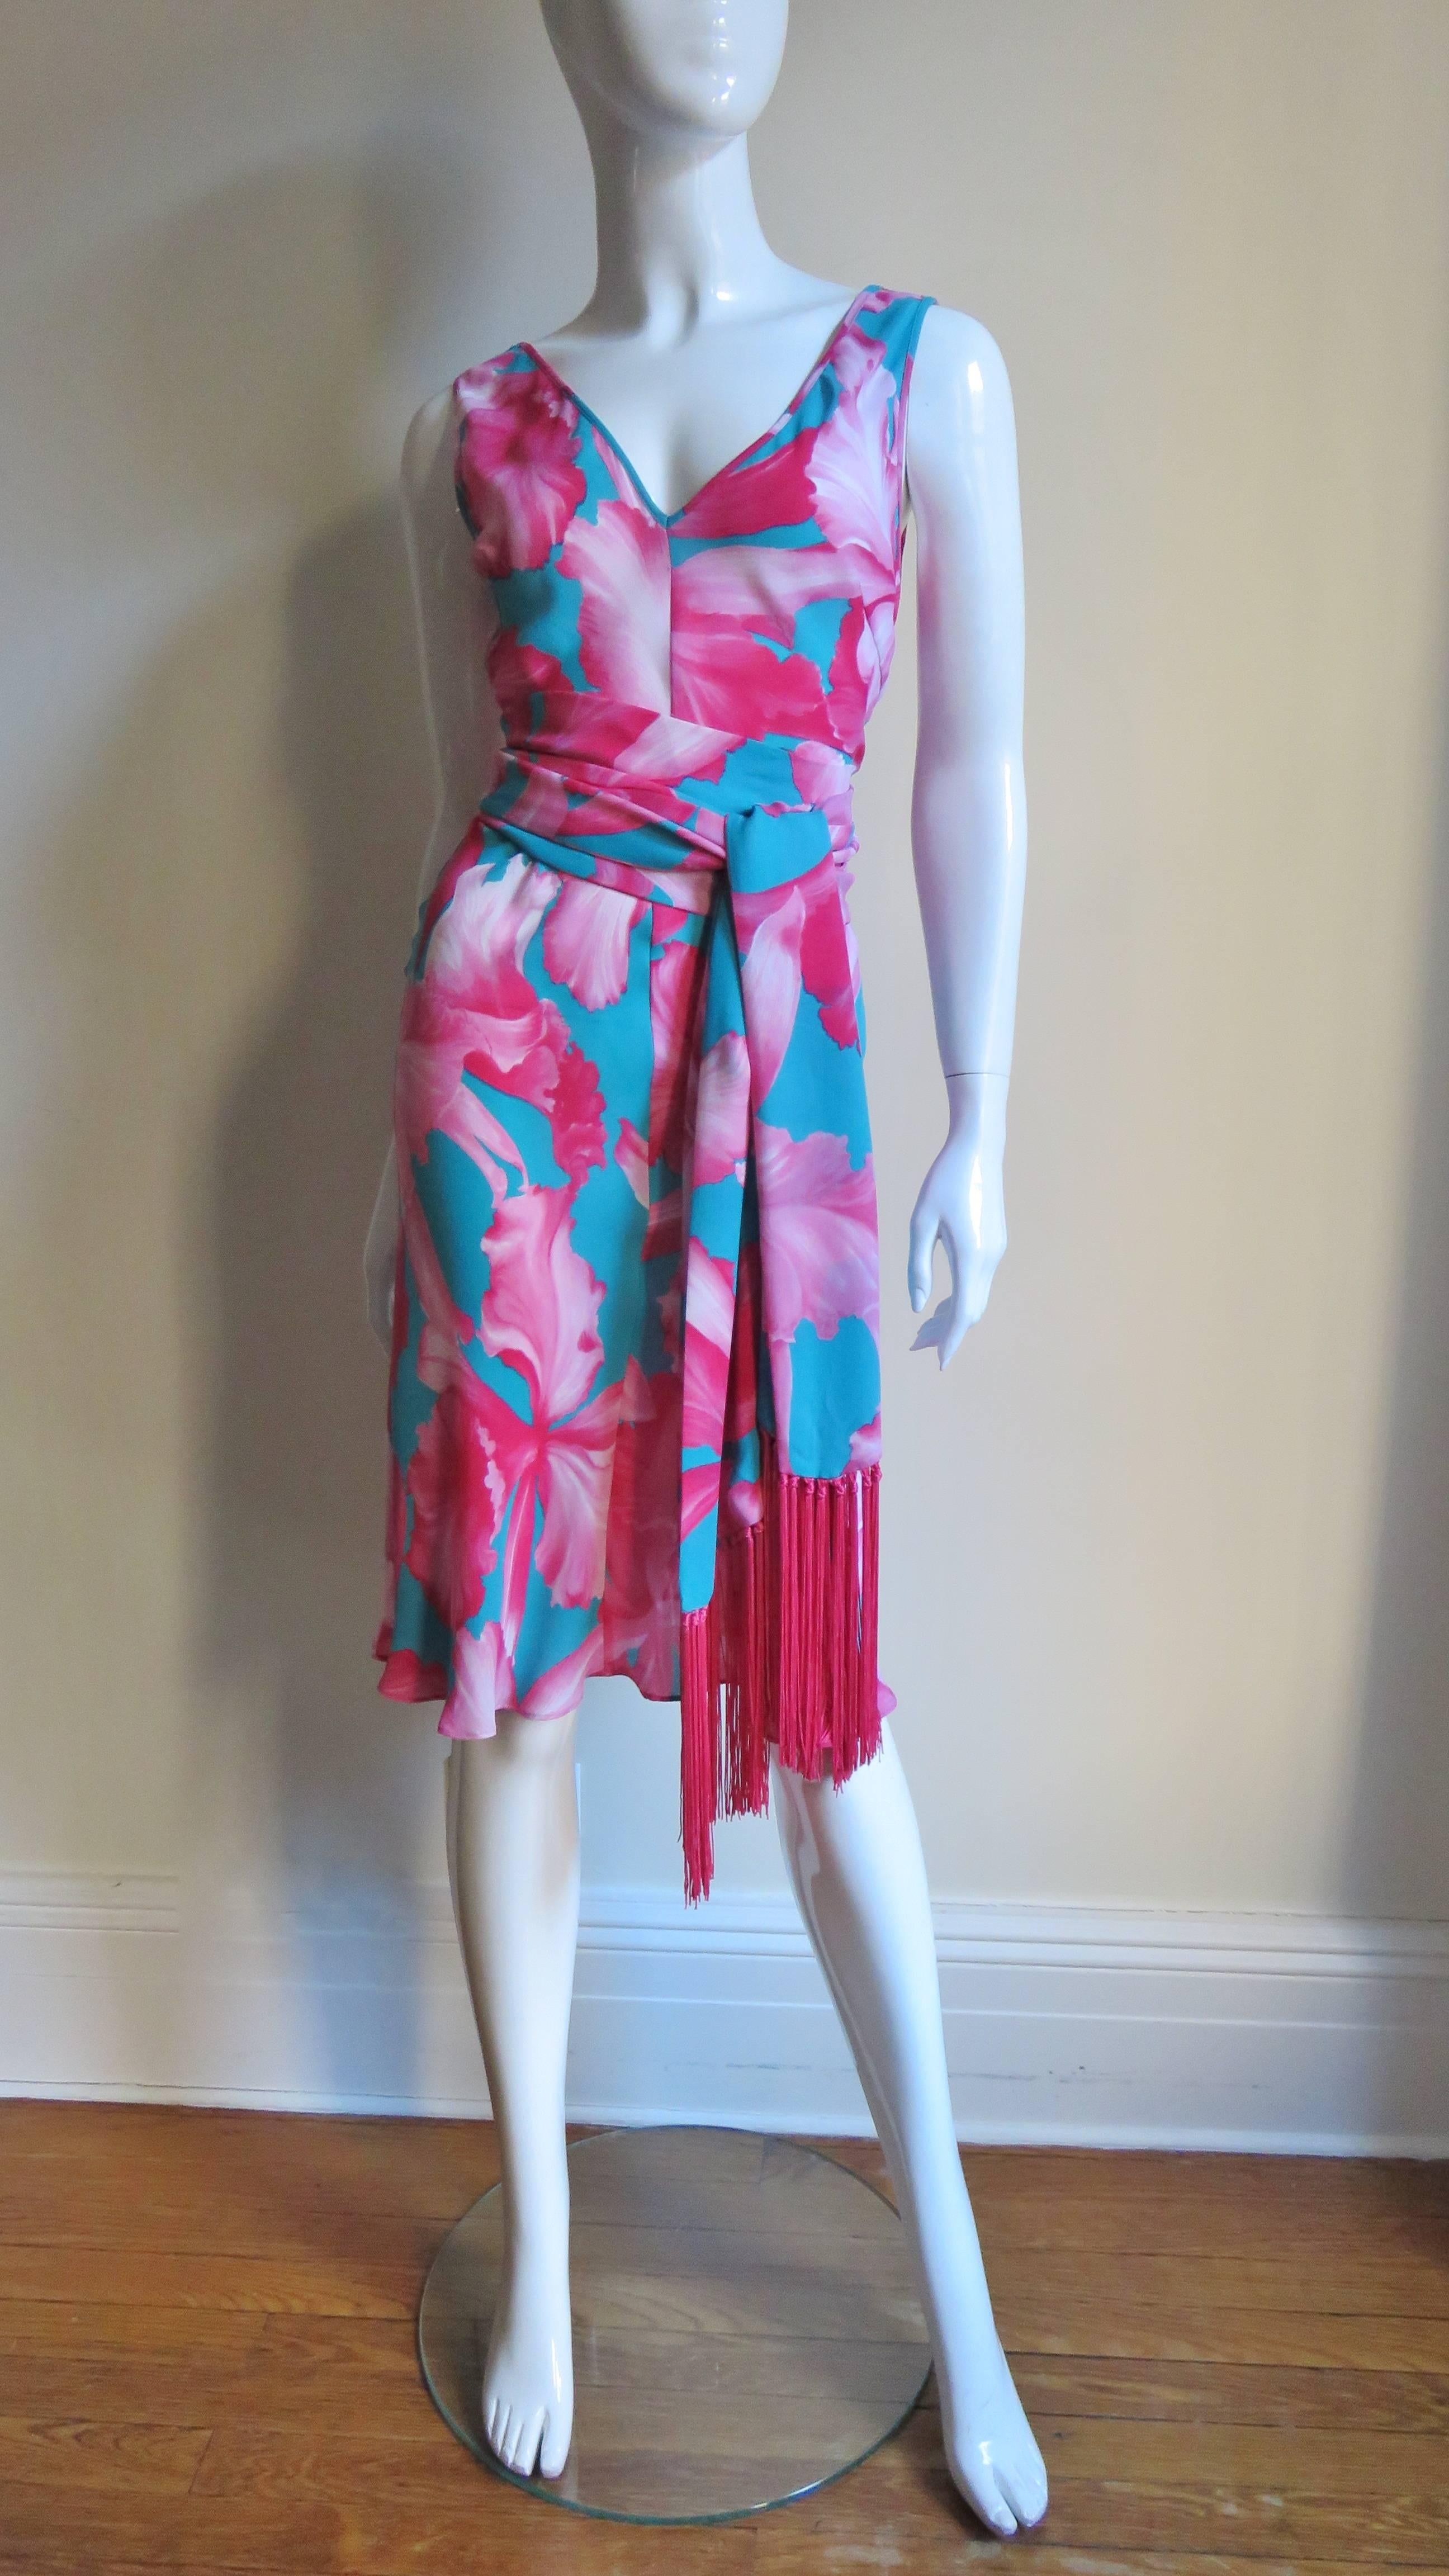  Celine Flower Print Silk Dress with Fringe Wrap In Good Condition For Sale In Water Mill, NY